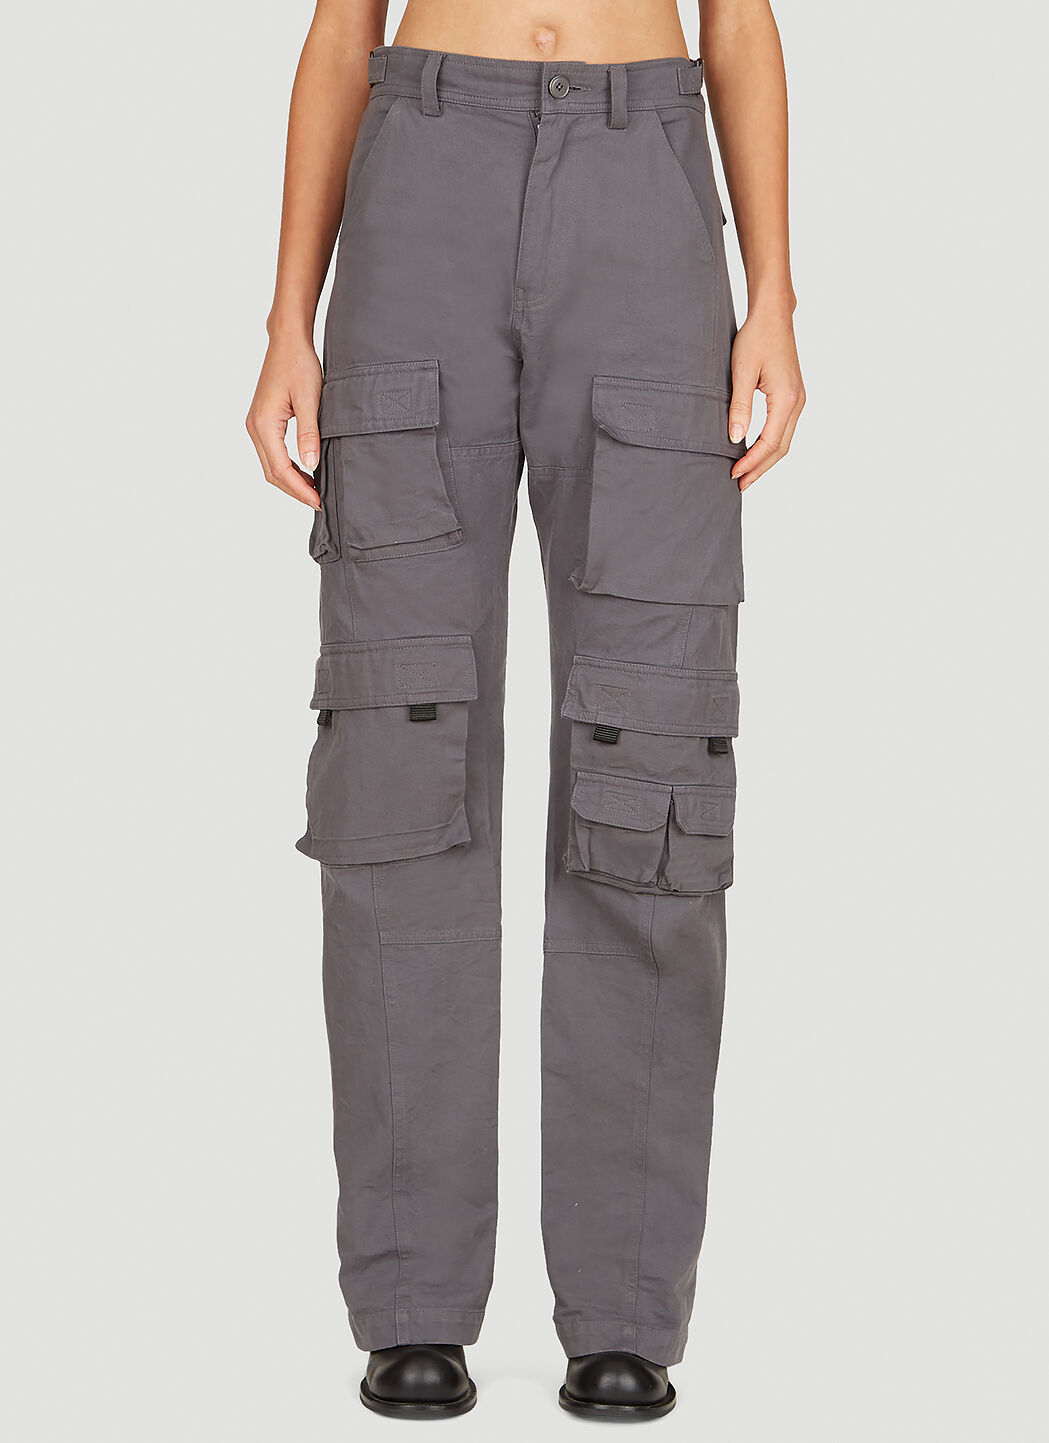 Space Available Twist Seam Cargo Pants Black spa0354016